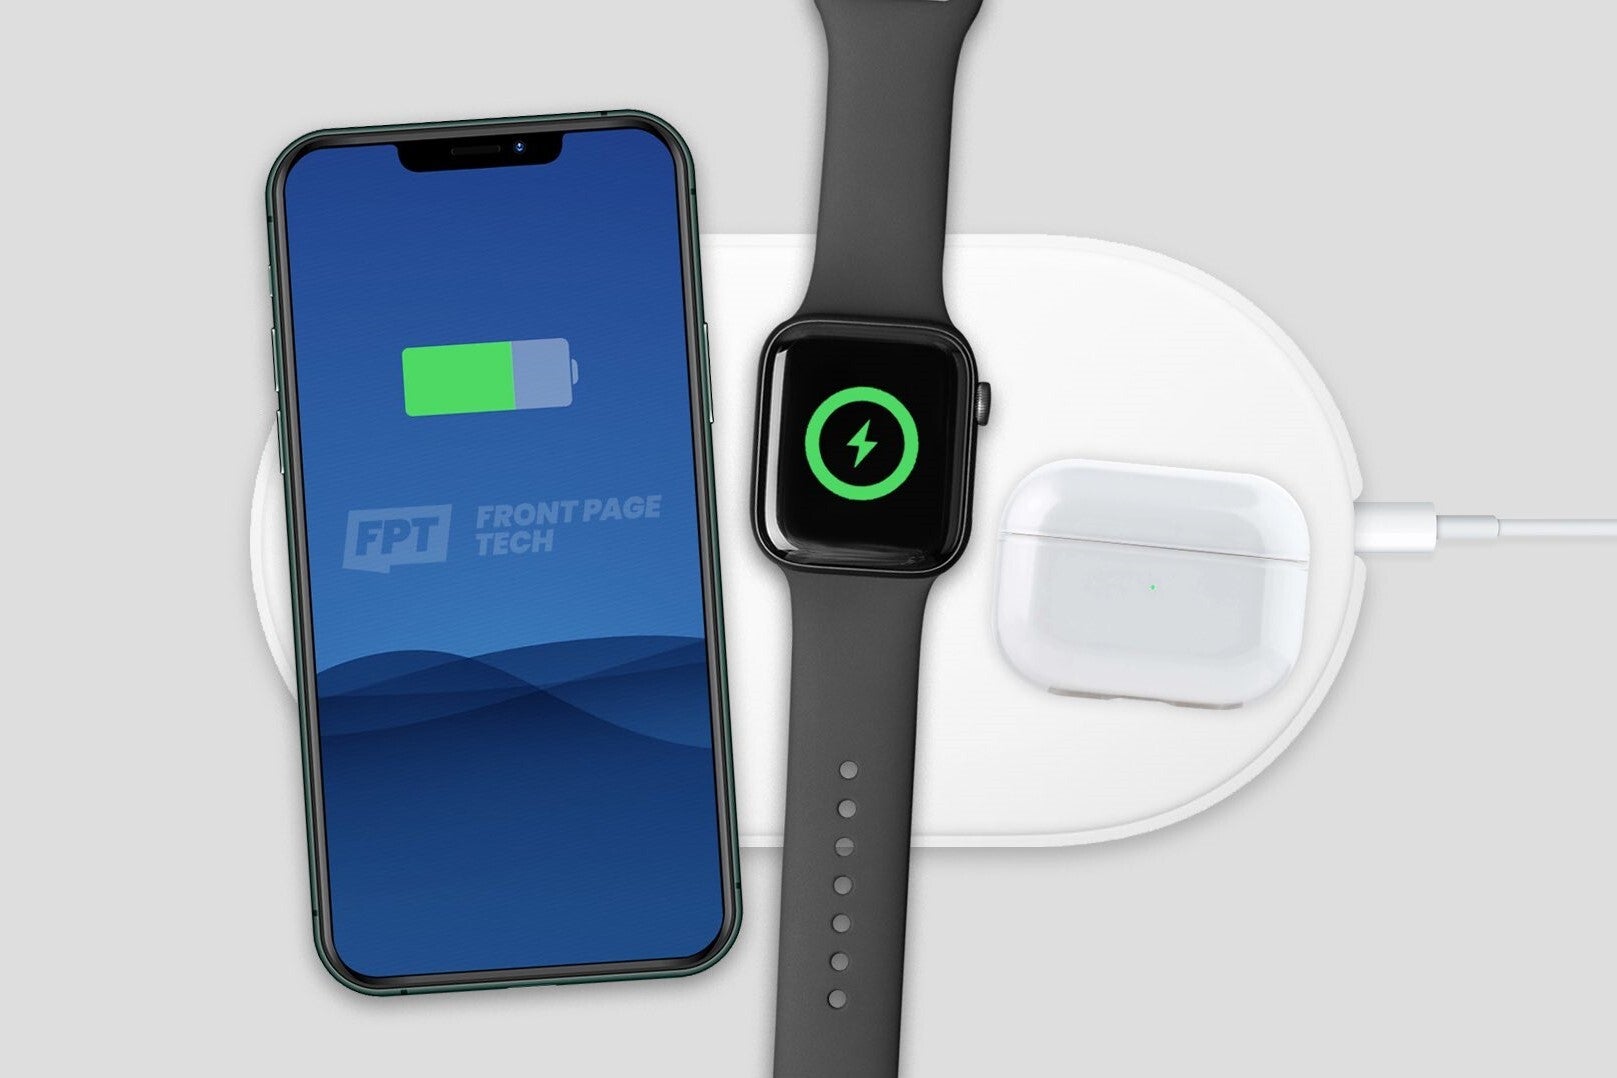 New AirPower concept render by Front Page Tech - Apple's AirPower could arrive later this year with a ridiculously high price